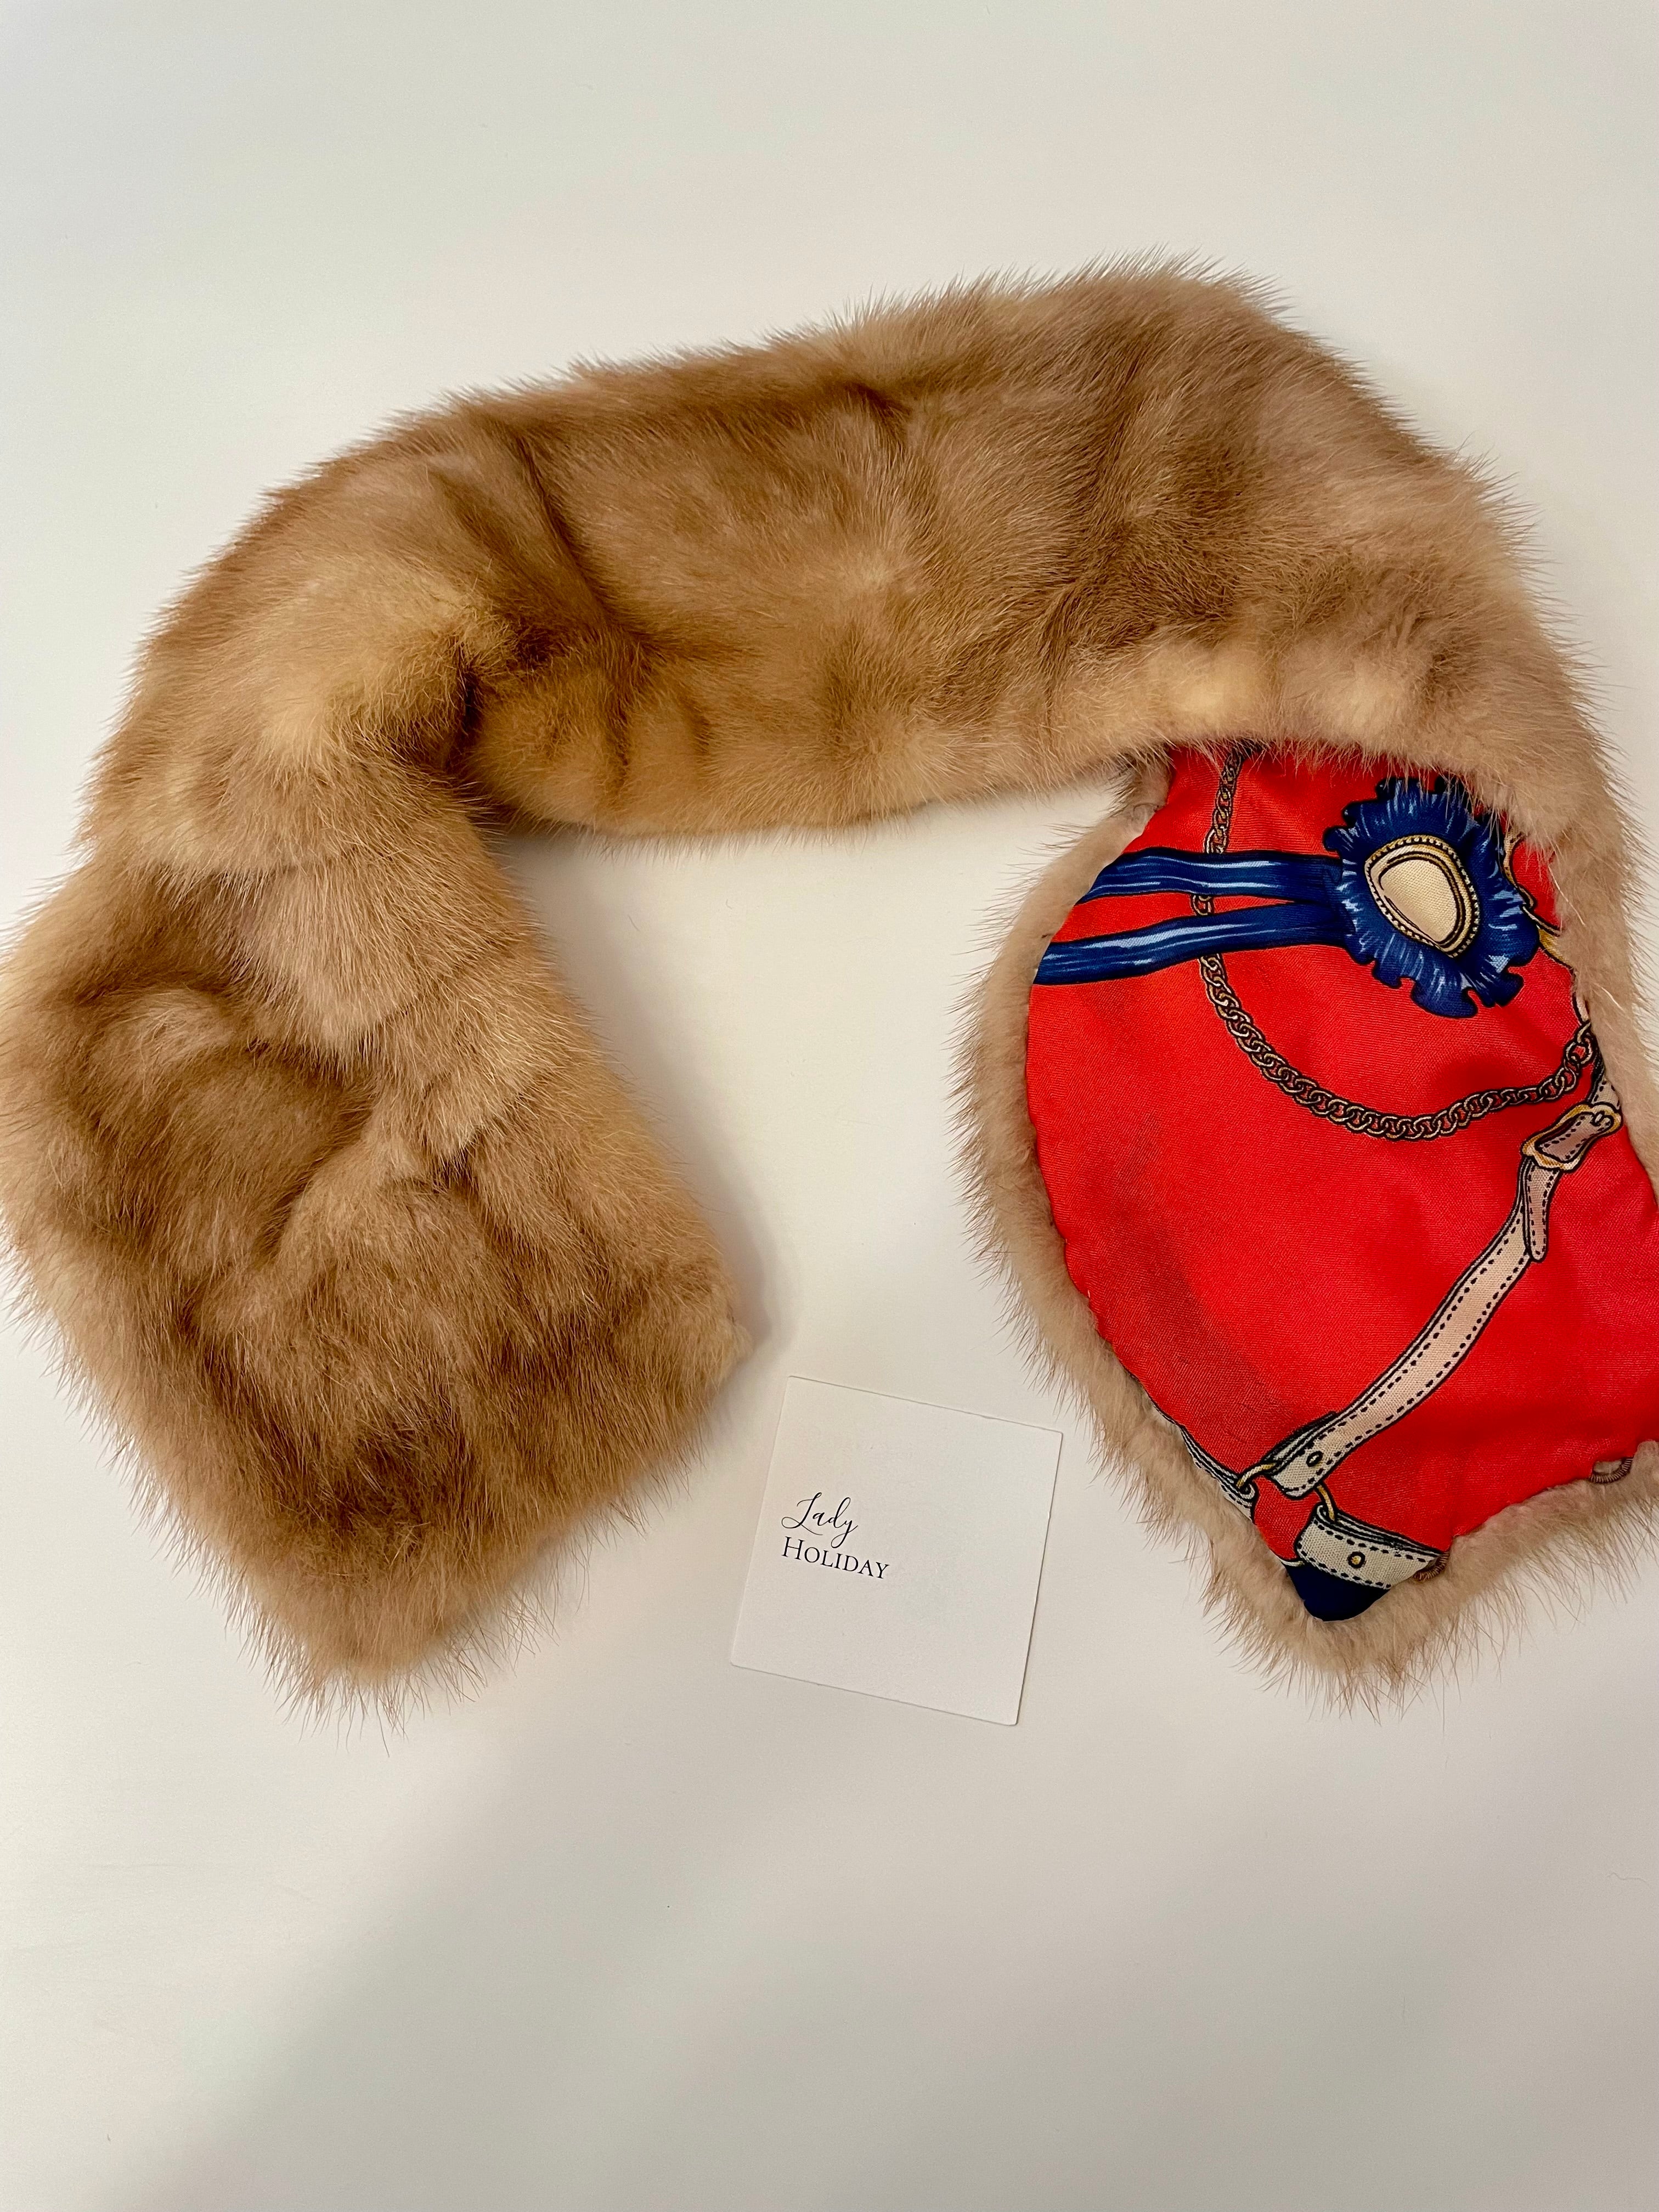 Ladies on Holiday, custom mink fur collar lined with vintage scarf.... so extraordinary